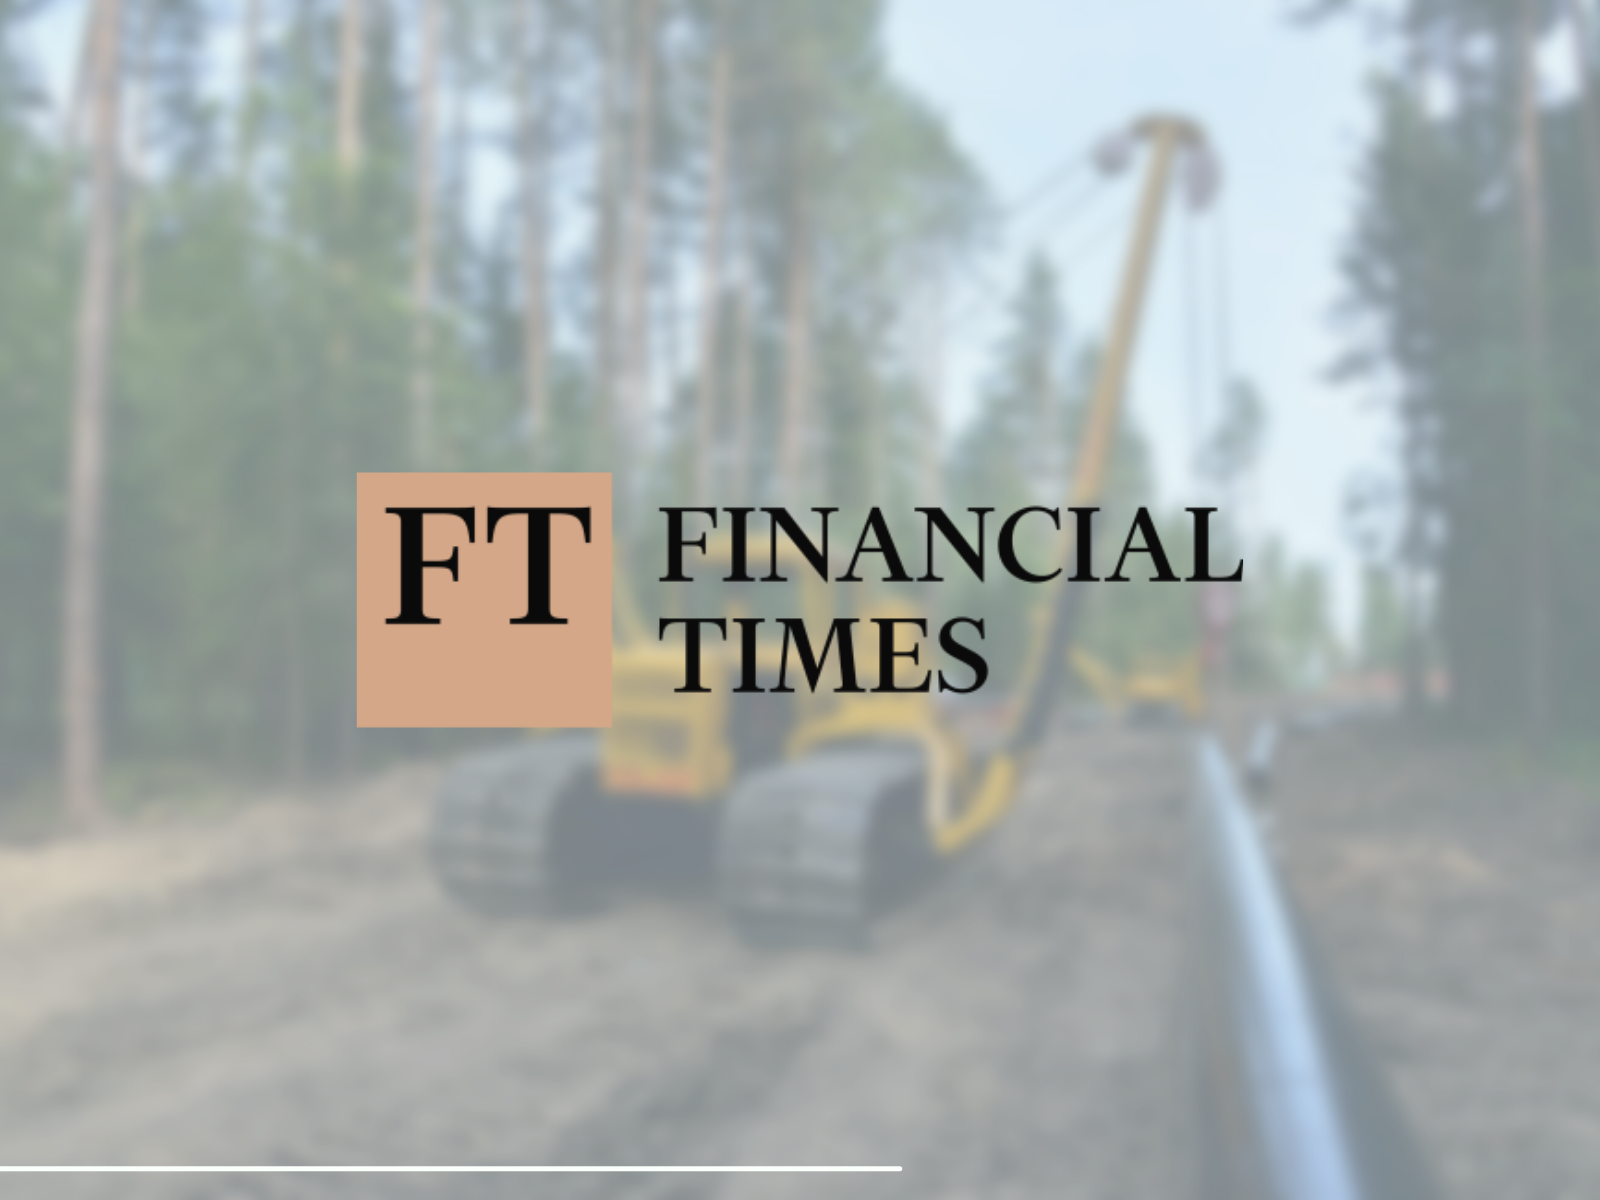 FT logo in front of pipeline construction in forest.